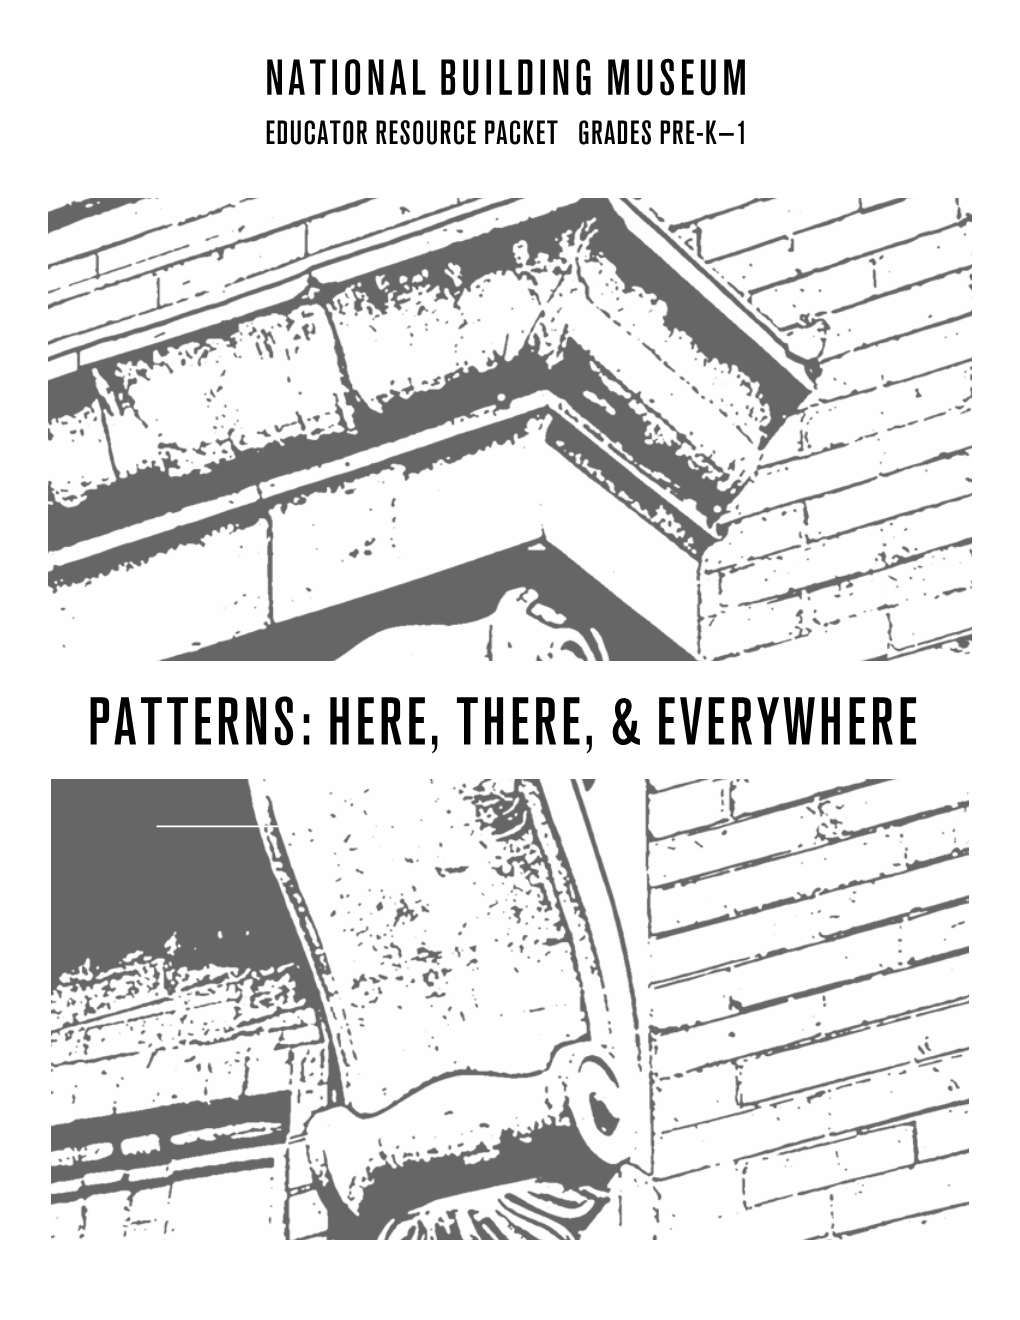 Patterns: Here, There, & Everywhere